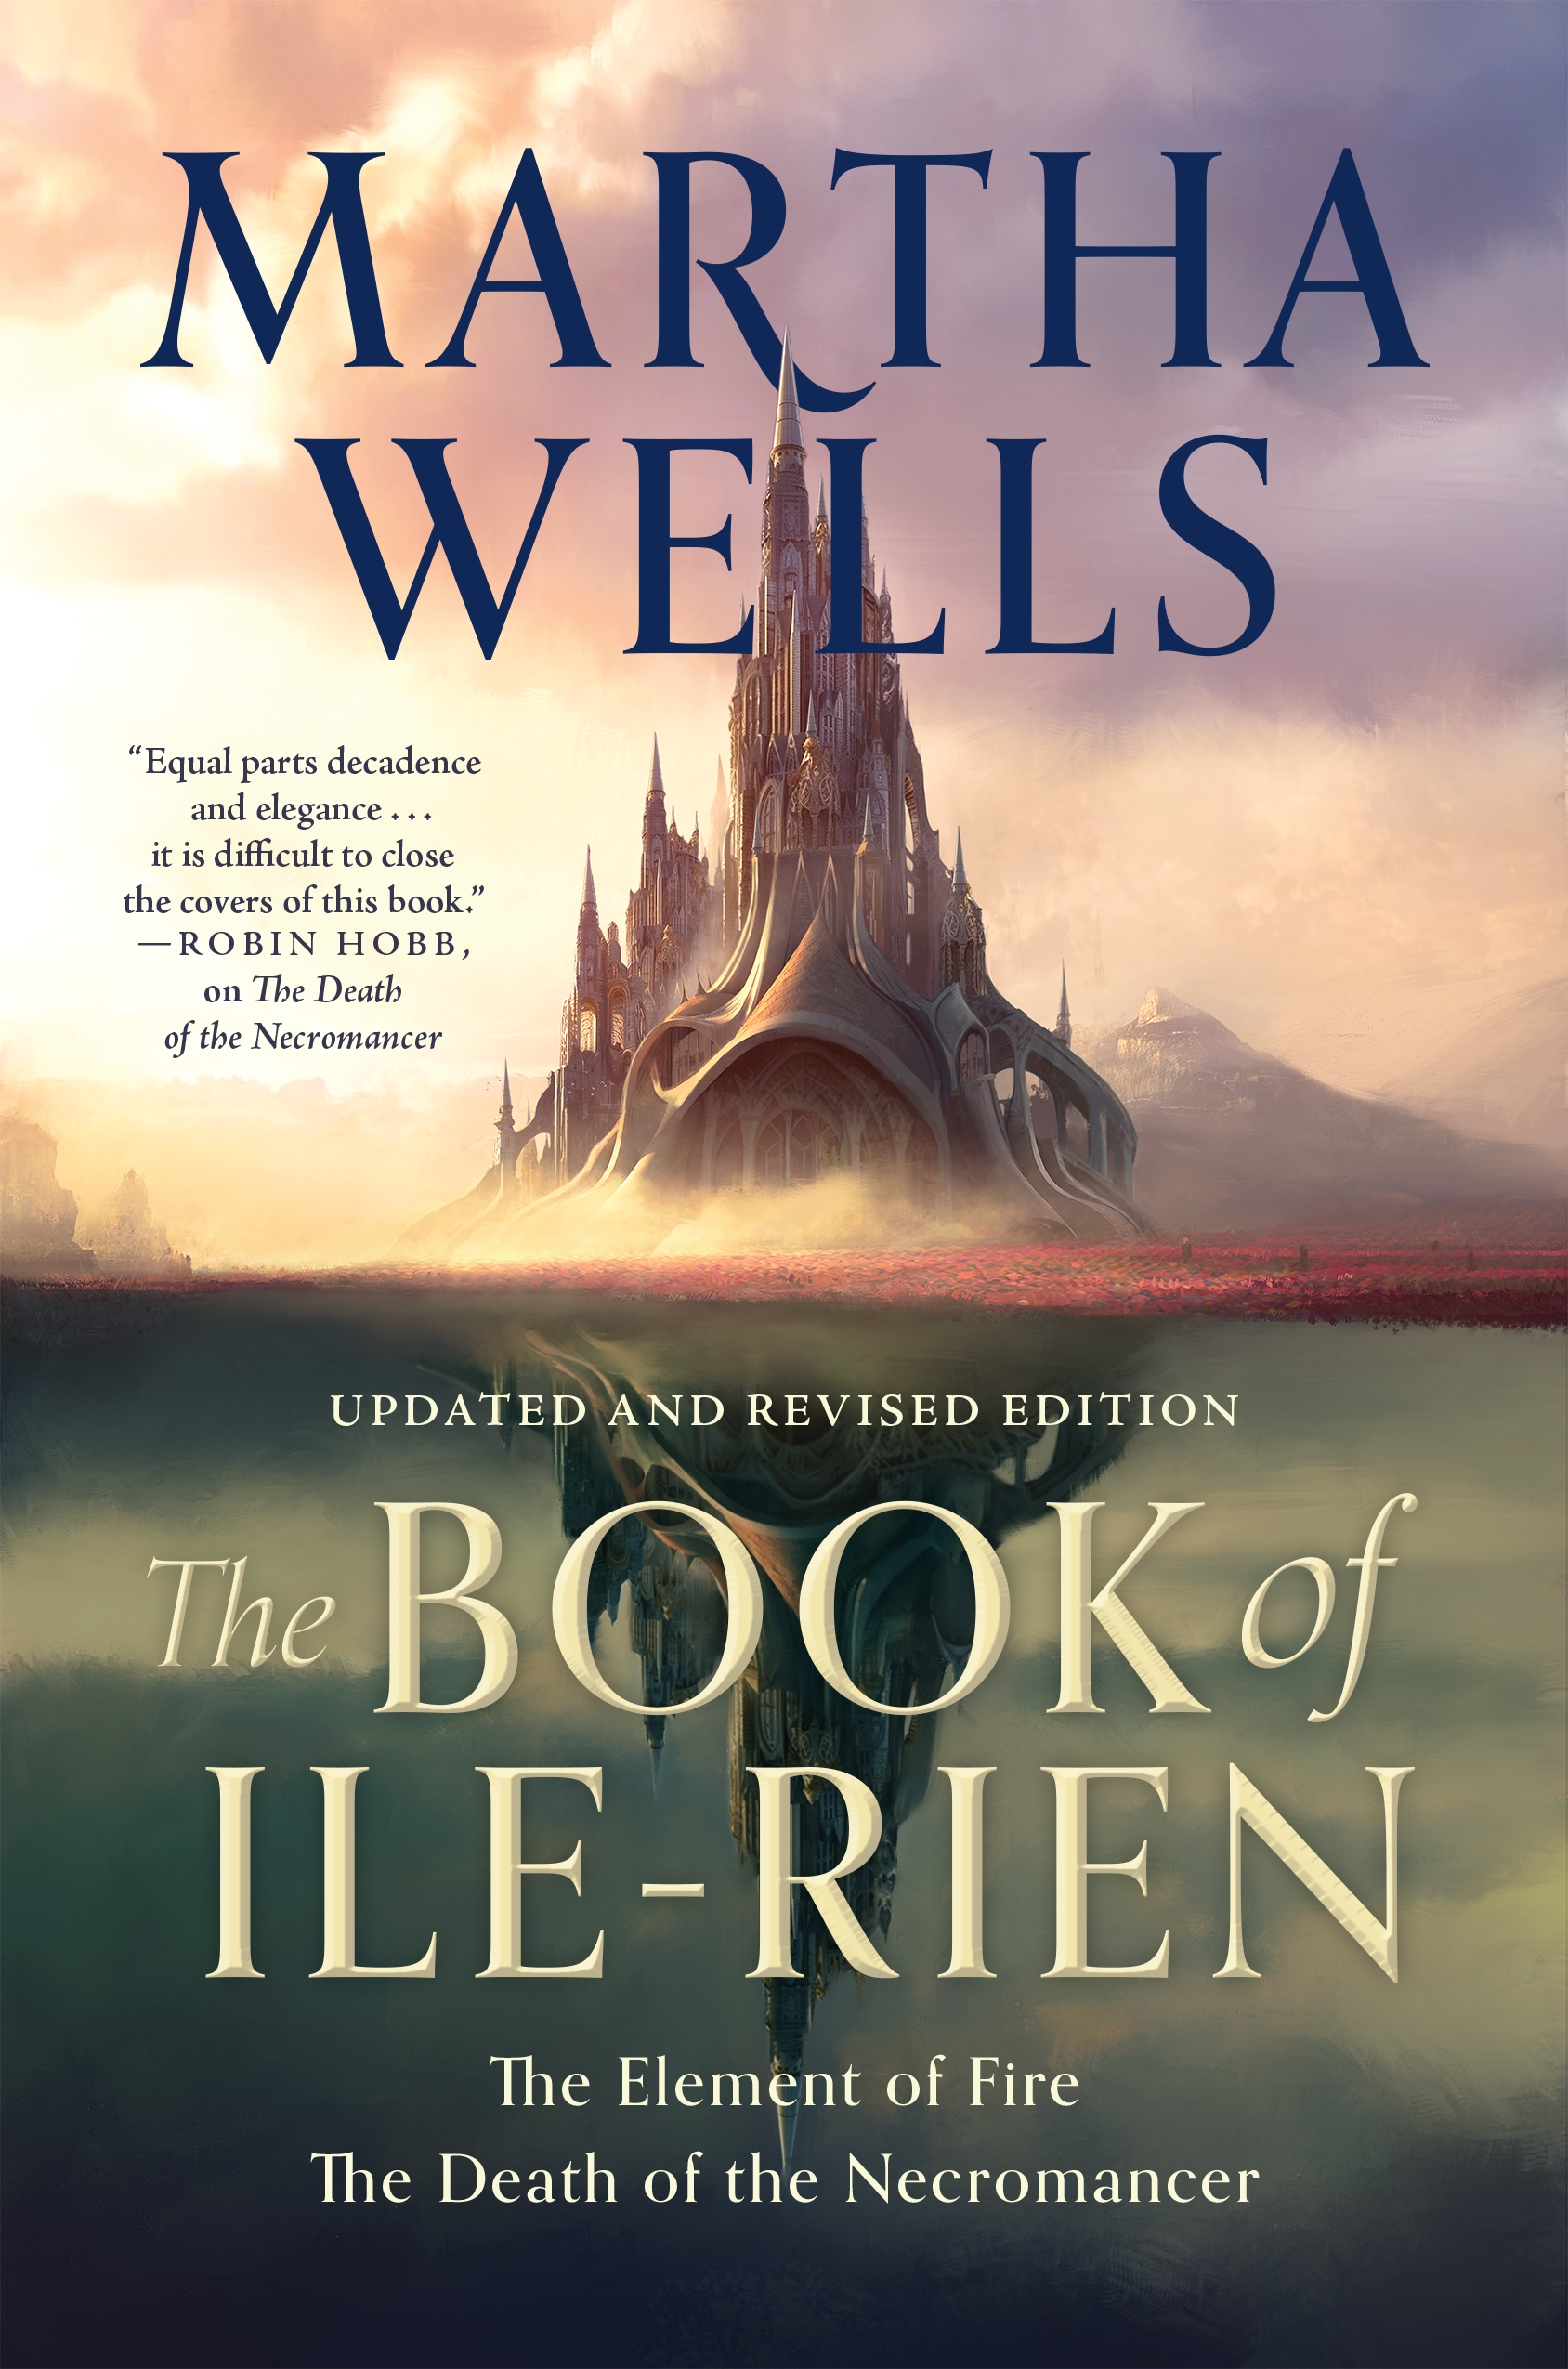 The Book of Ile-Rien : The Element of Fire & The Death of the Necromancer - Updated and Revised Edition by Martha Wells